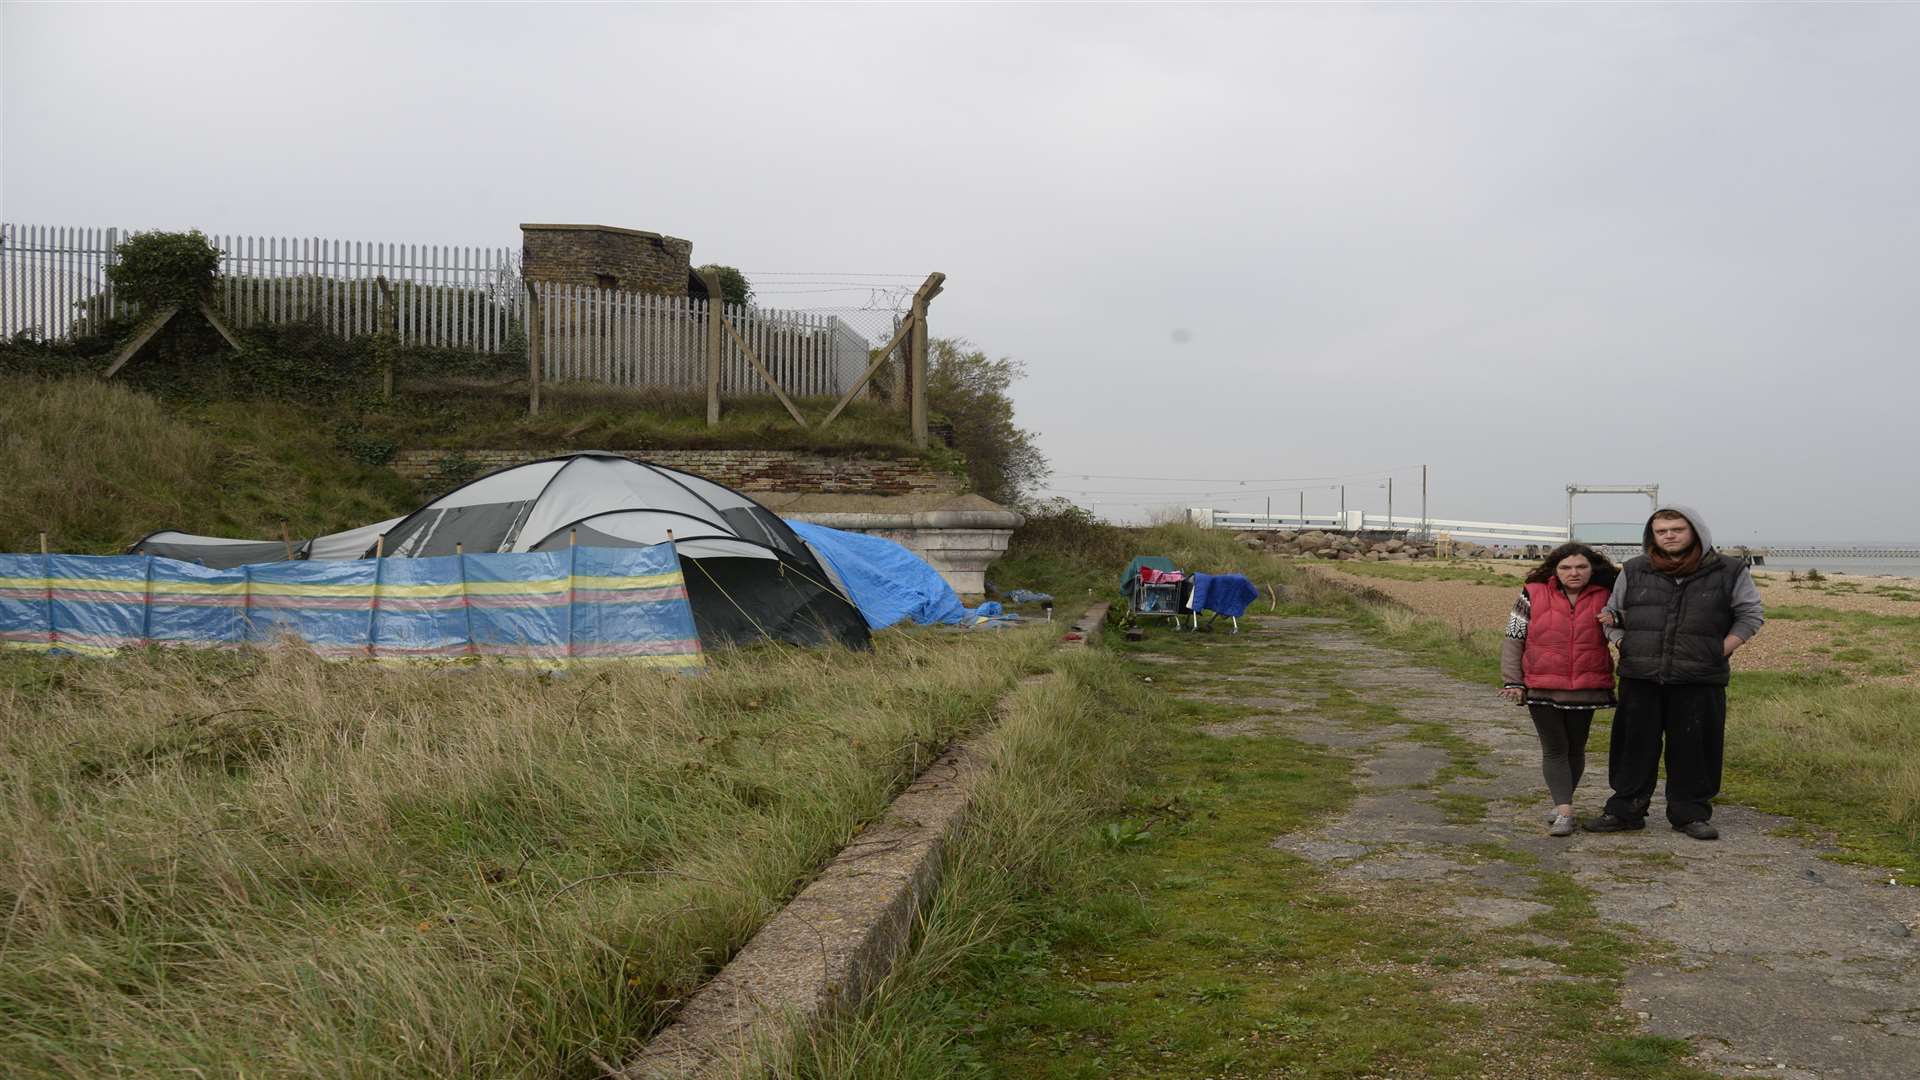 The couple are resigned to spending Christmas in their tent. Picture: Chris Davey